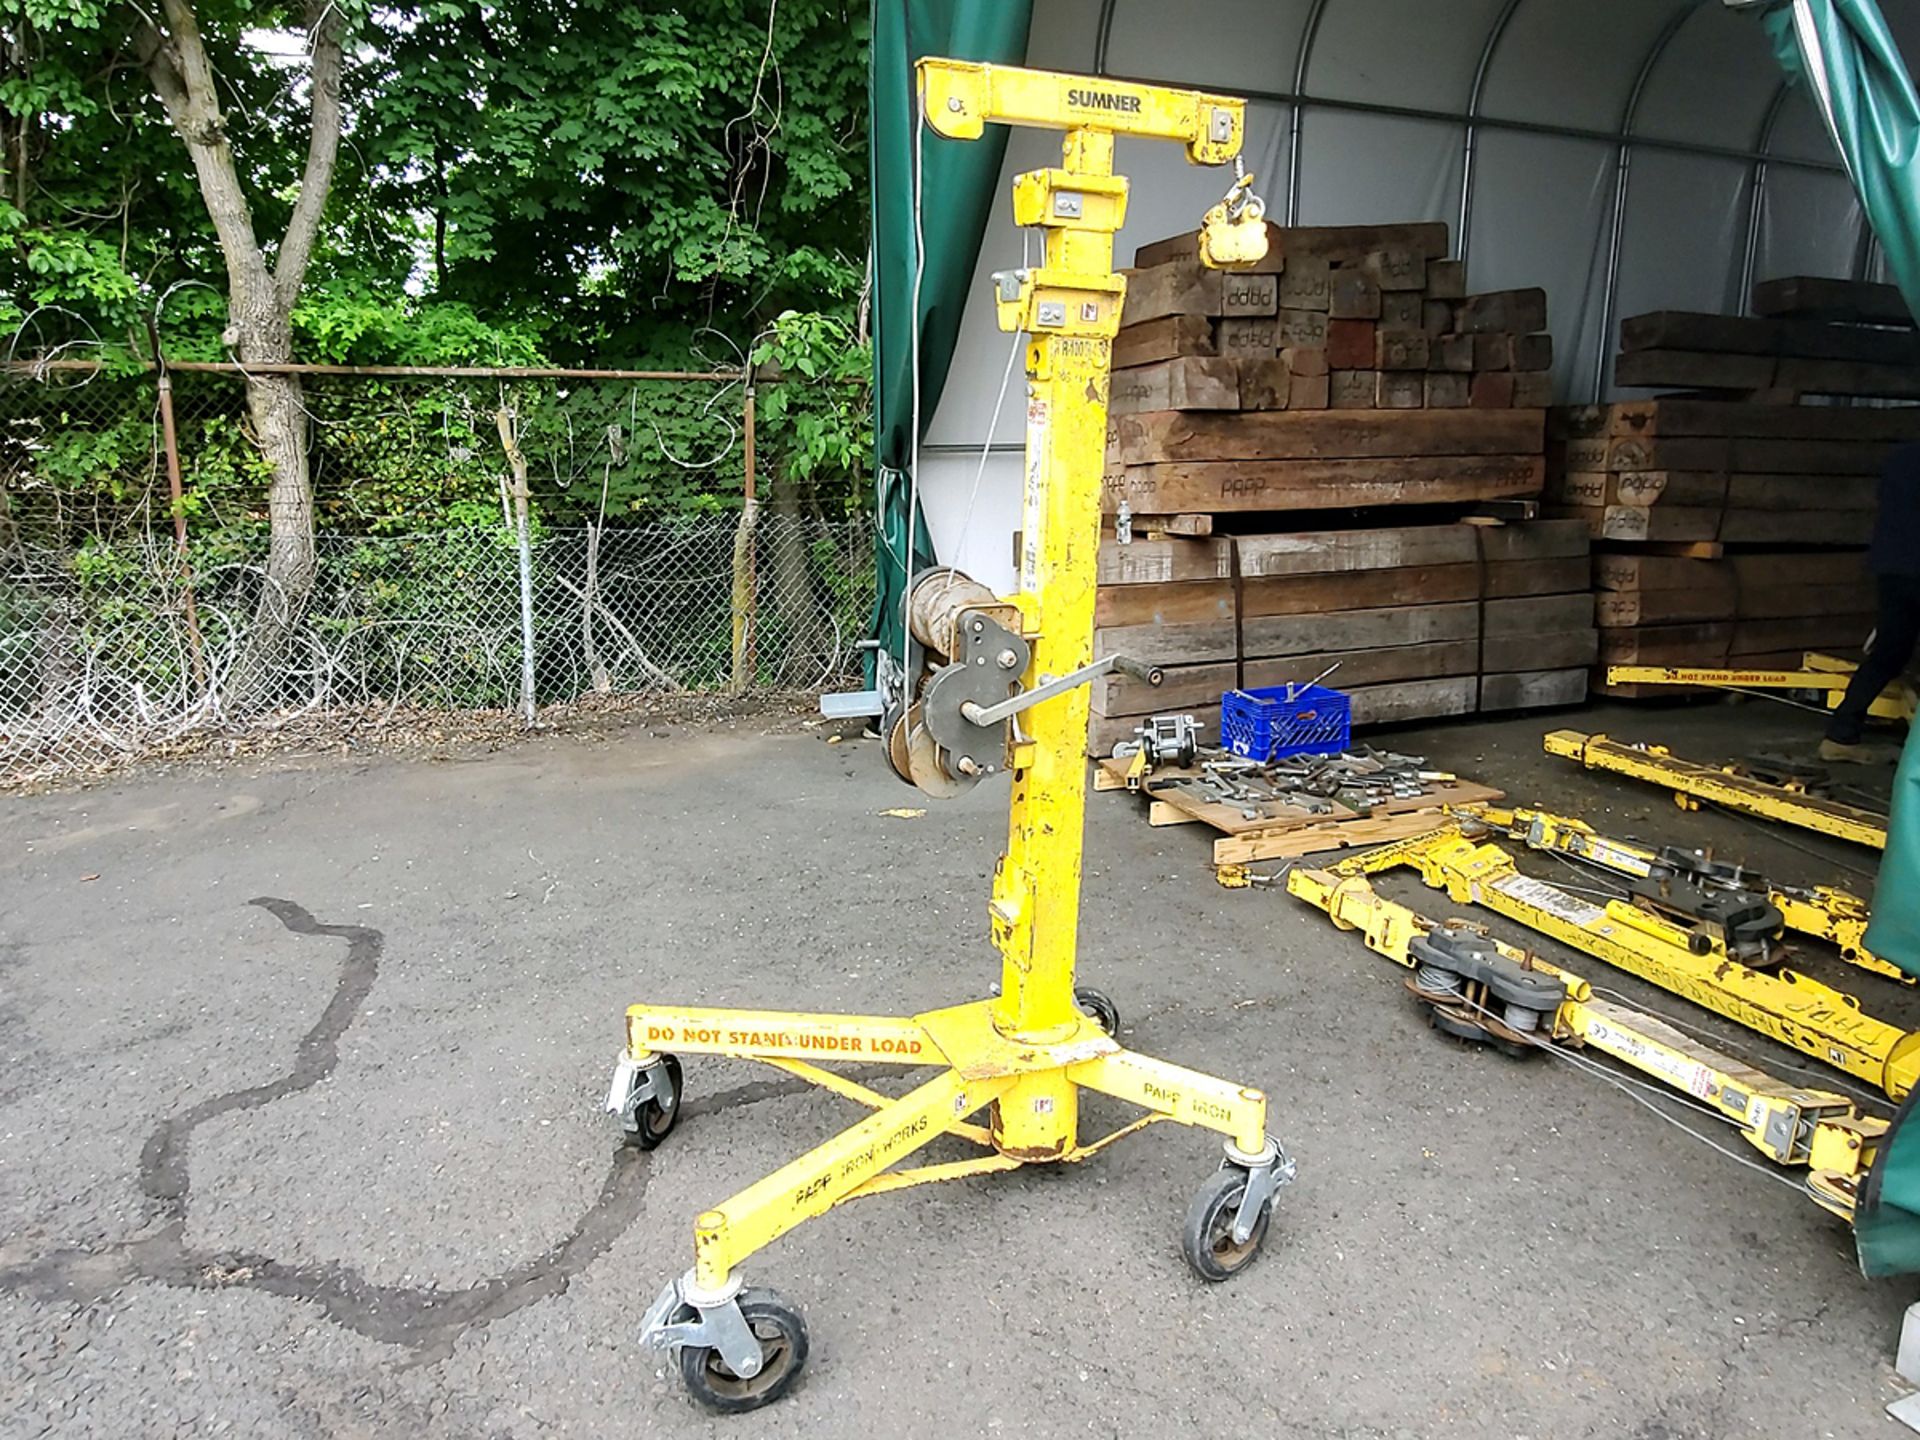 Sumner R-100/R-150 Roust A Bout Lift 1500lb Capacity and 15' Lift Height - Image 2 of 2